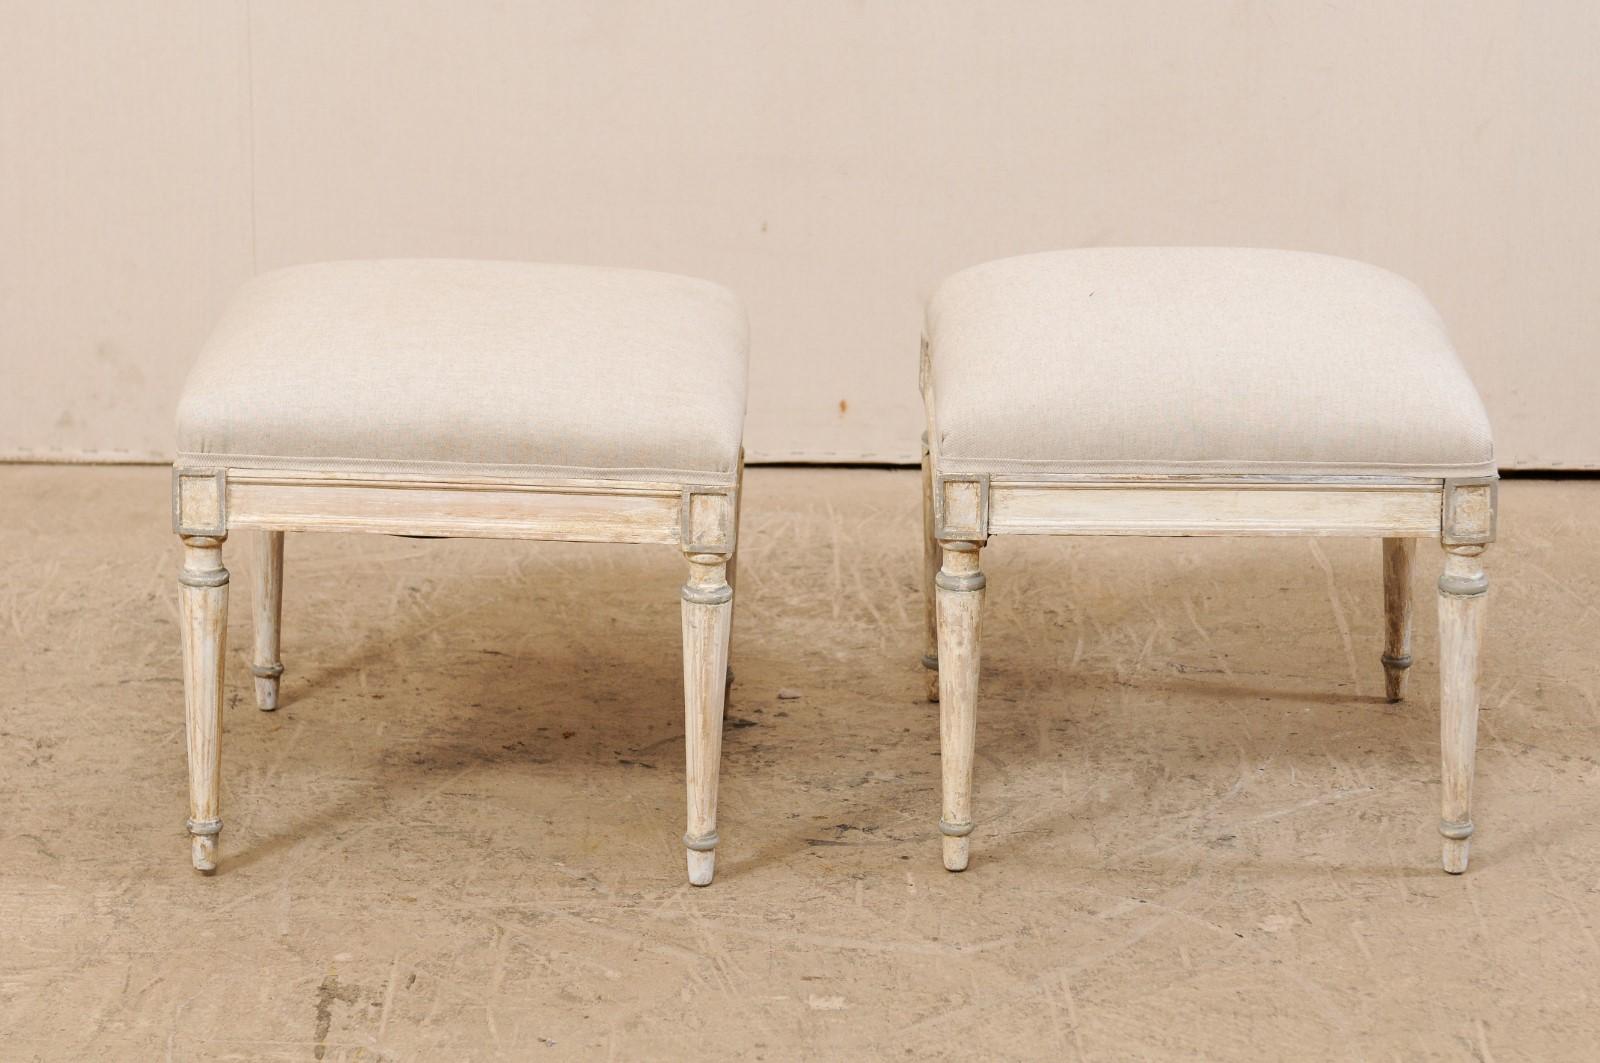 Pair of French Painted Wood Stools, circa 1920s (Französisch)